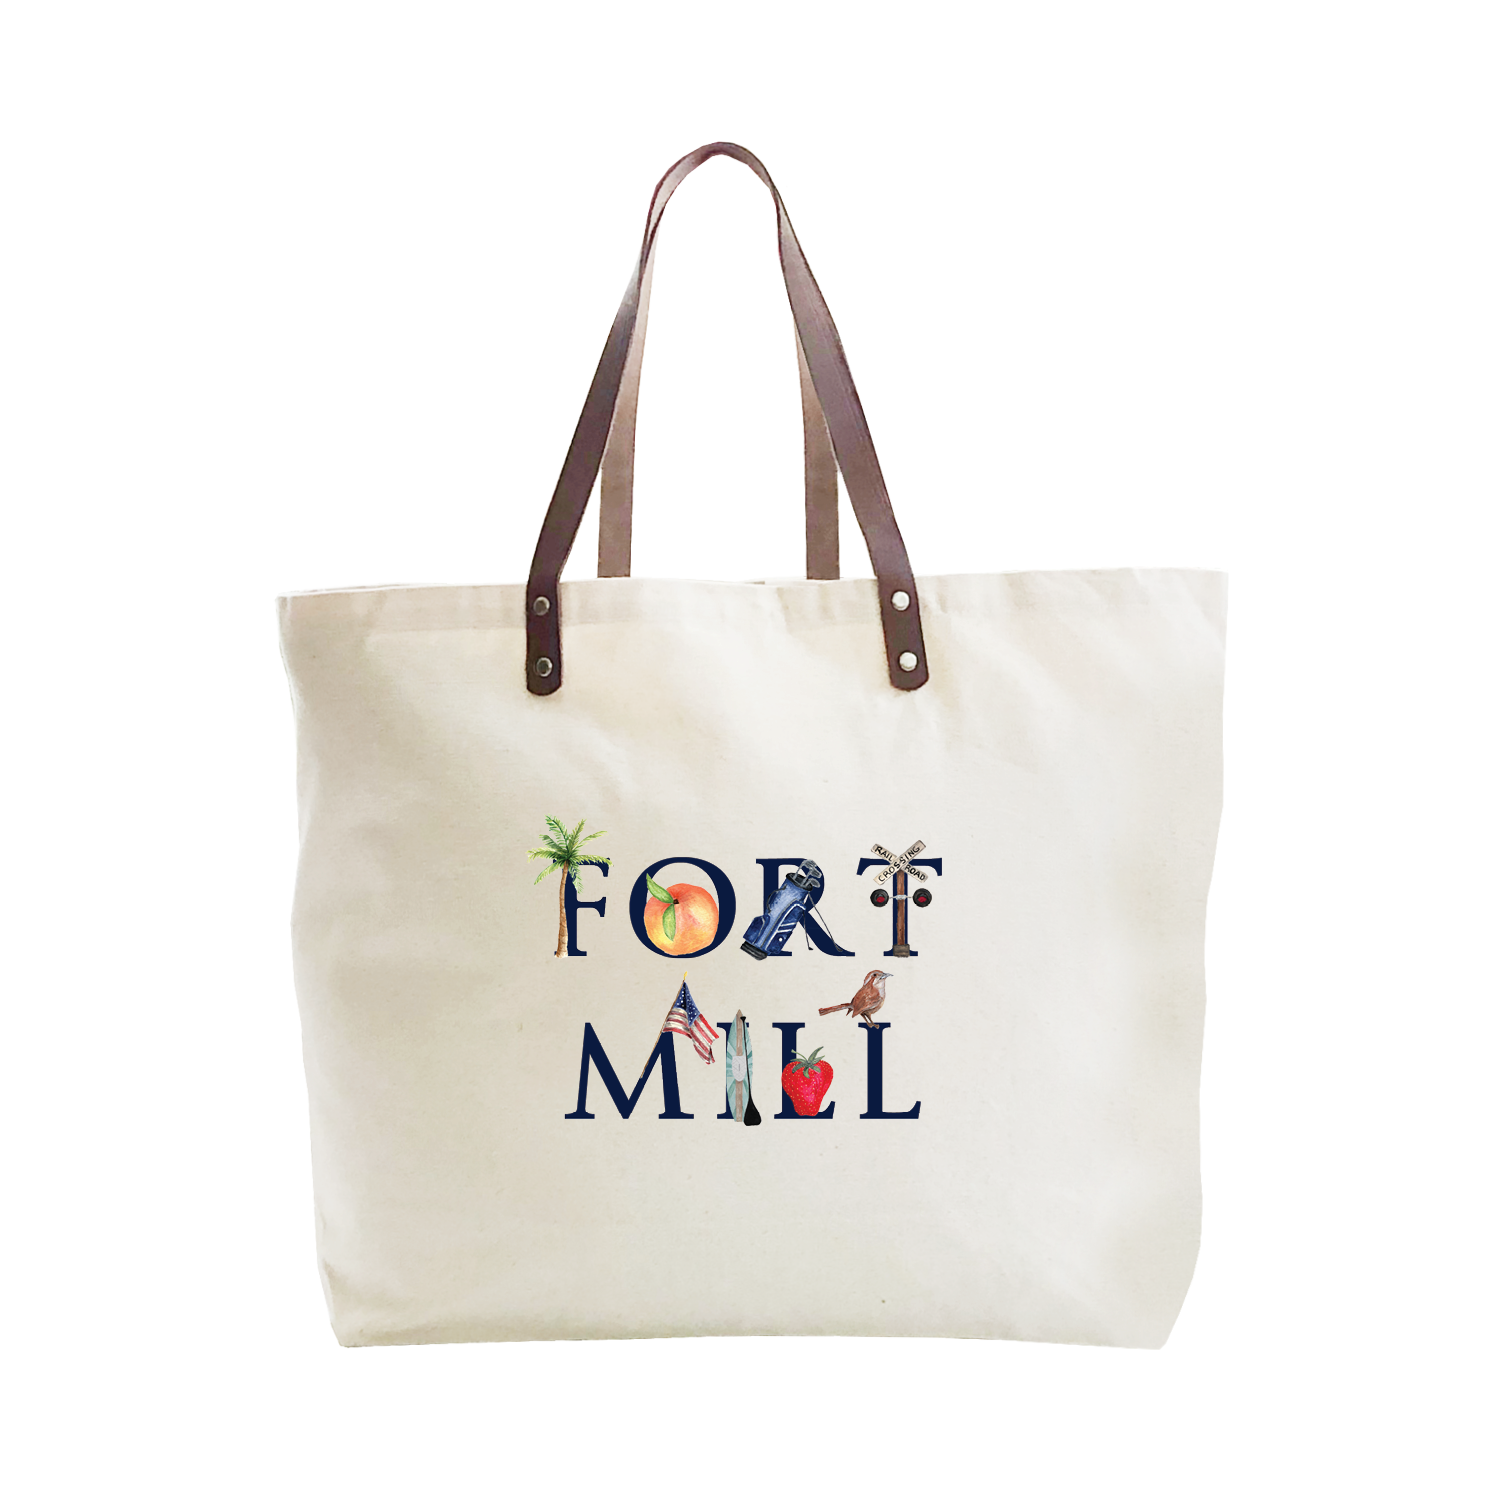 fort mill large tote